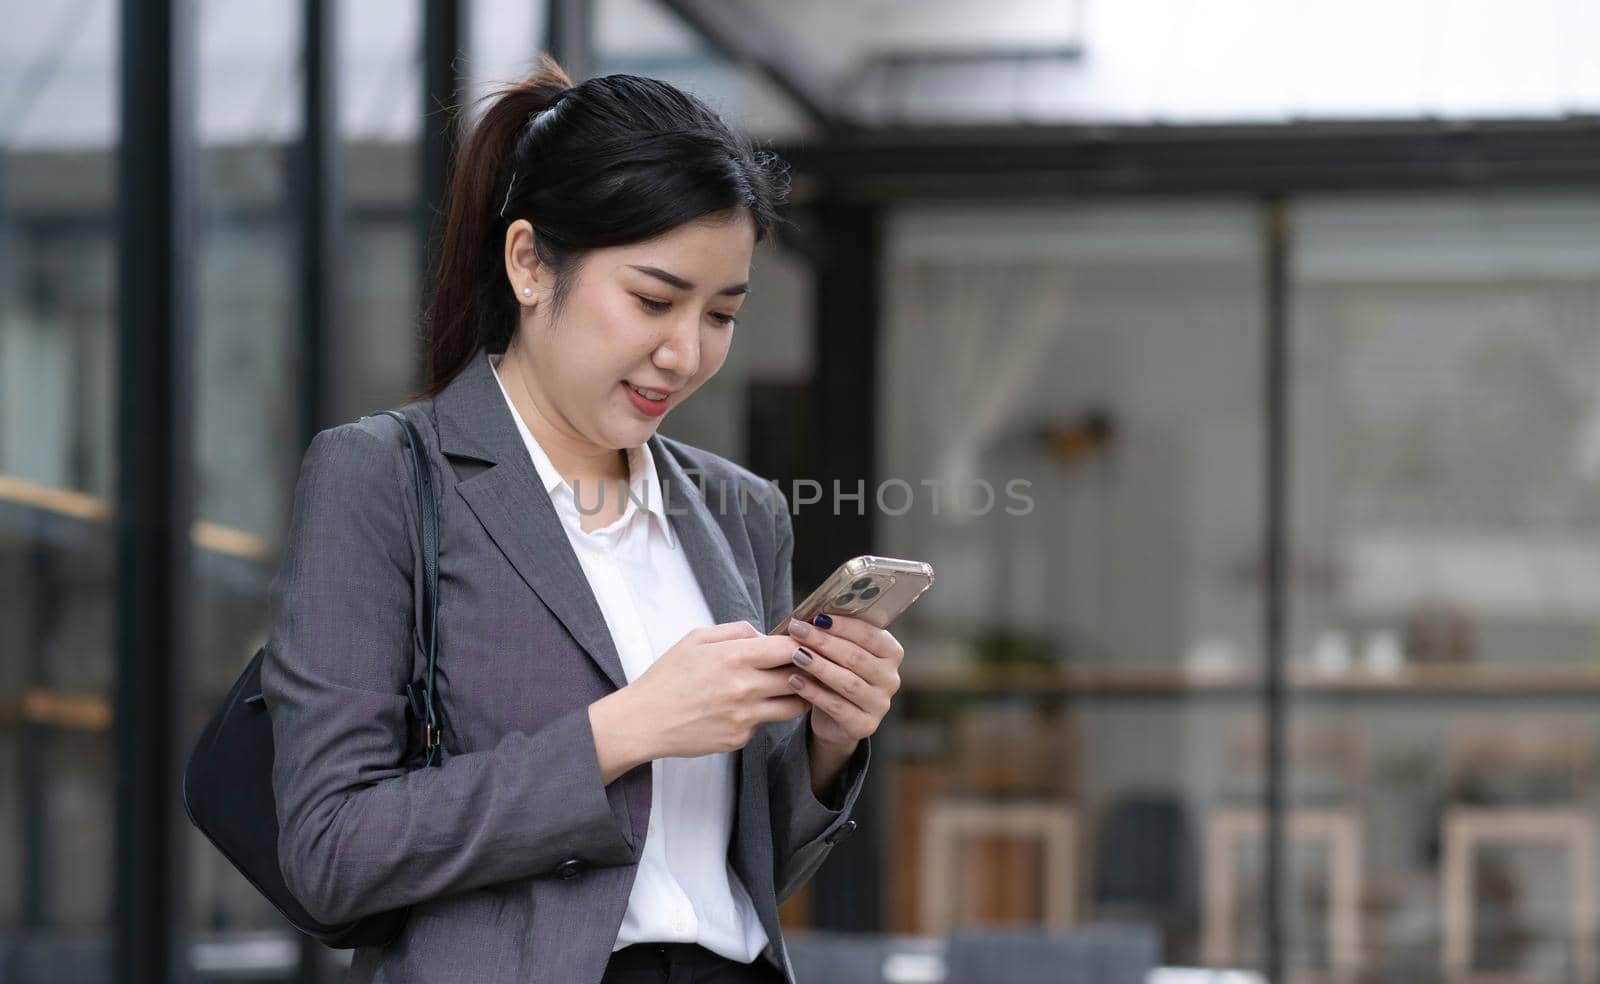 Portrait of a beautiful smiling woman using a mobile phone outdoors.